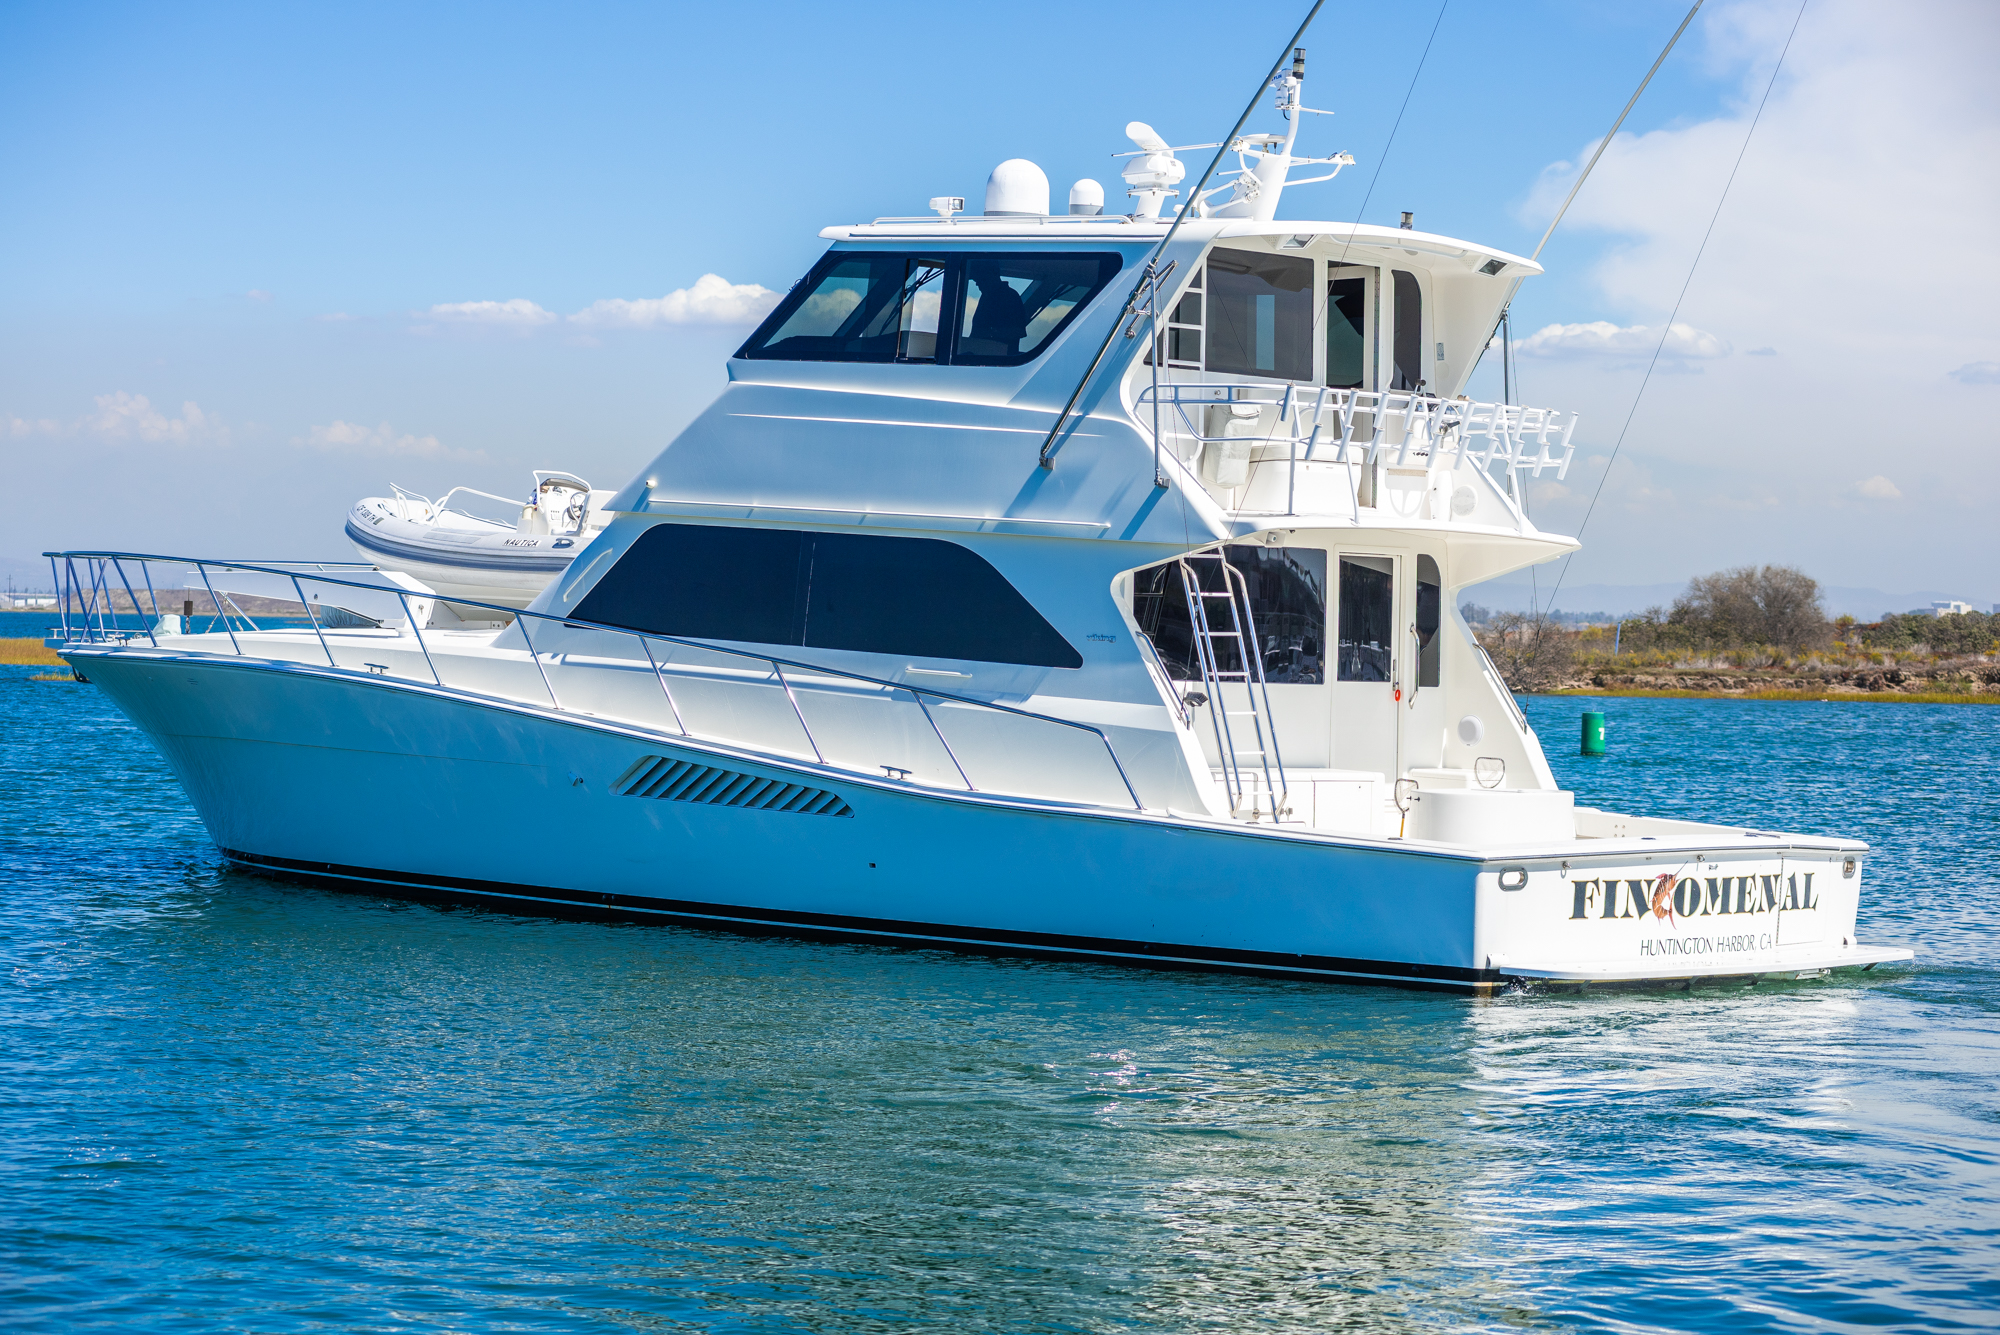 southern california yacht sales